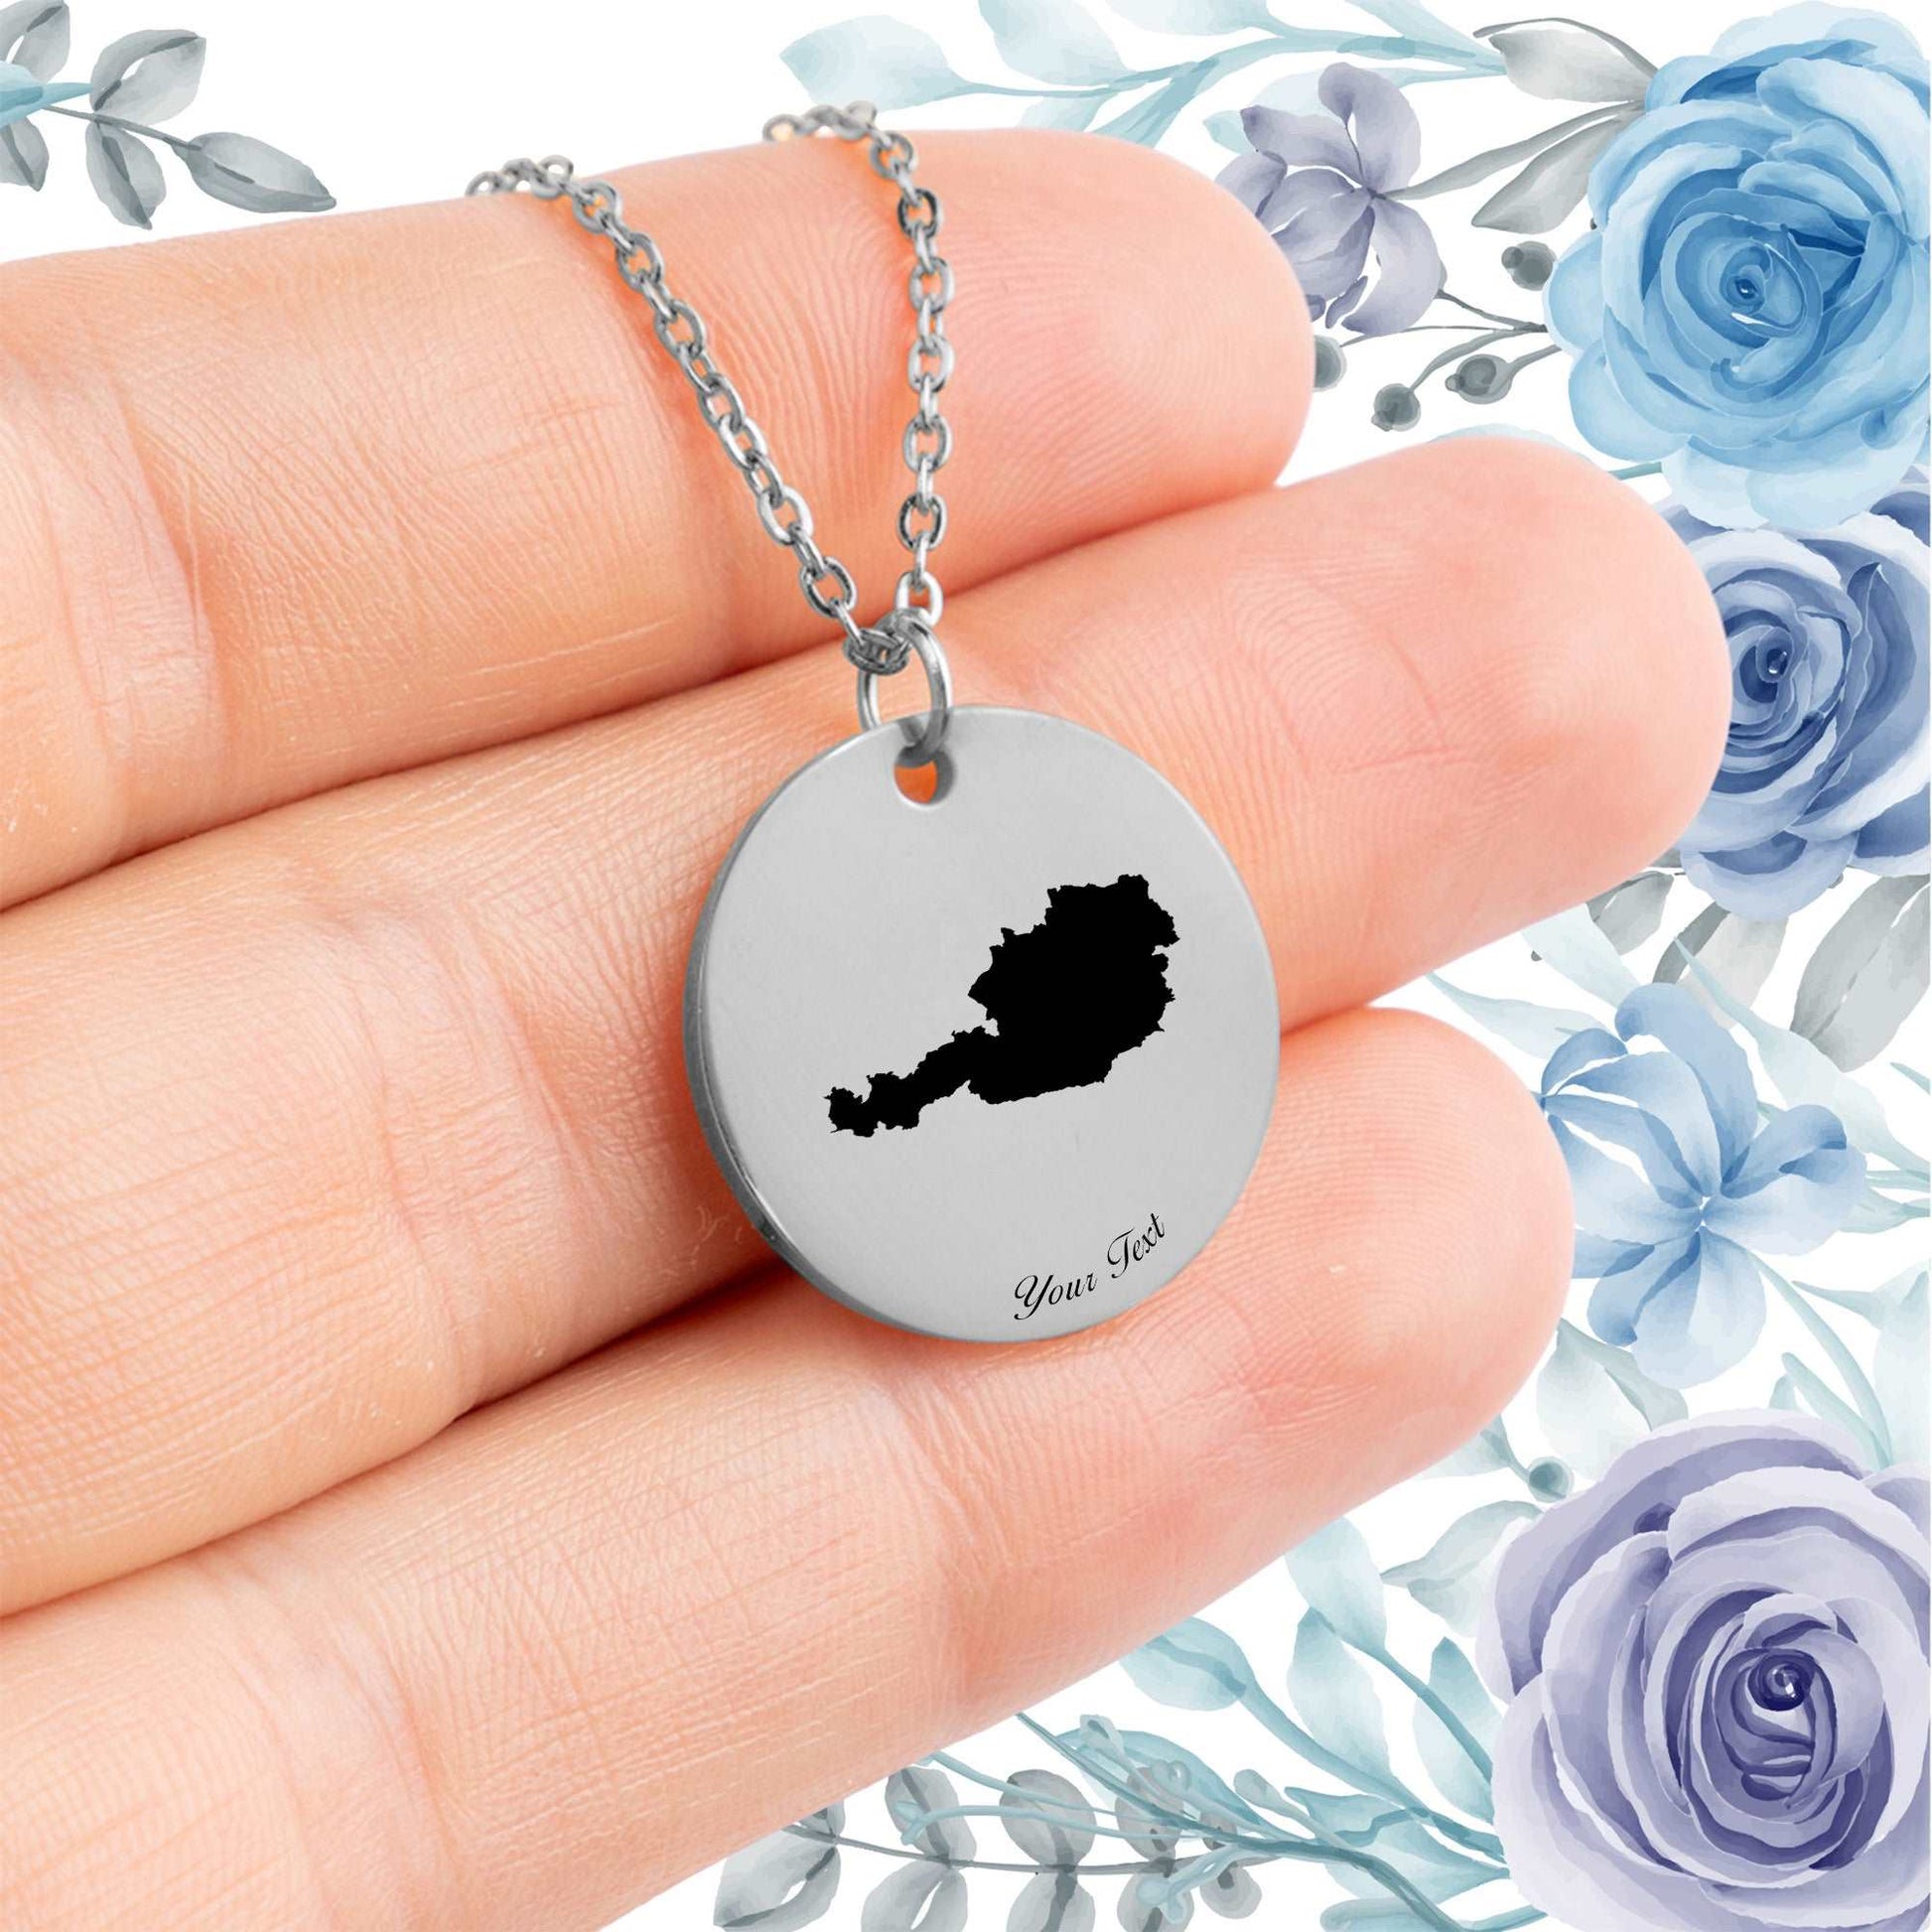 Austria Country Map Necklace - Personalizable Jewelry